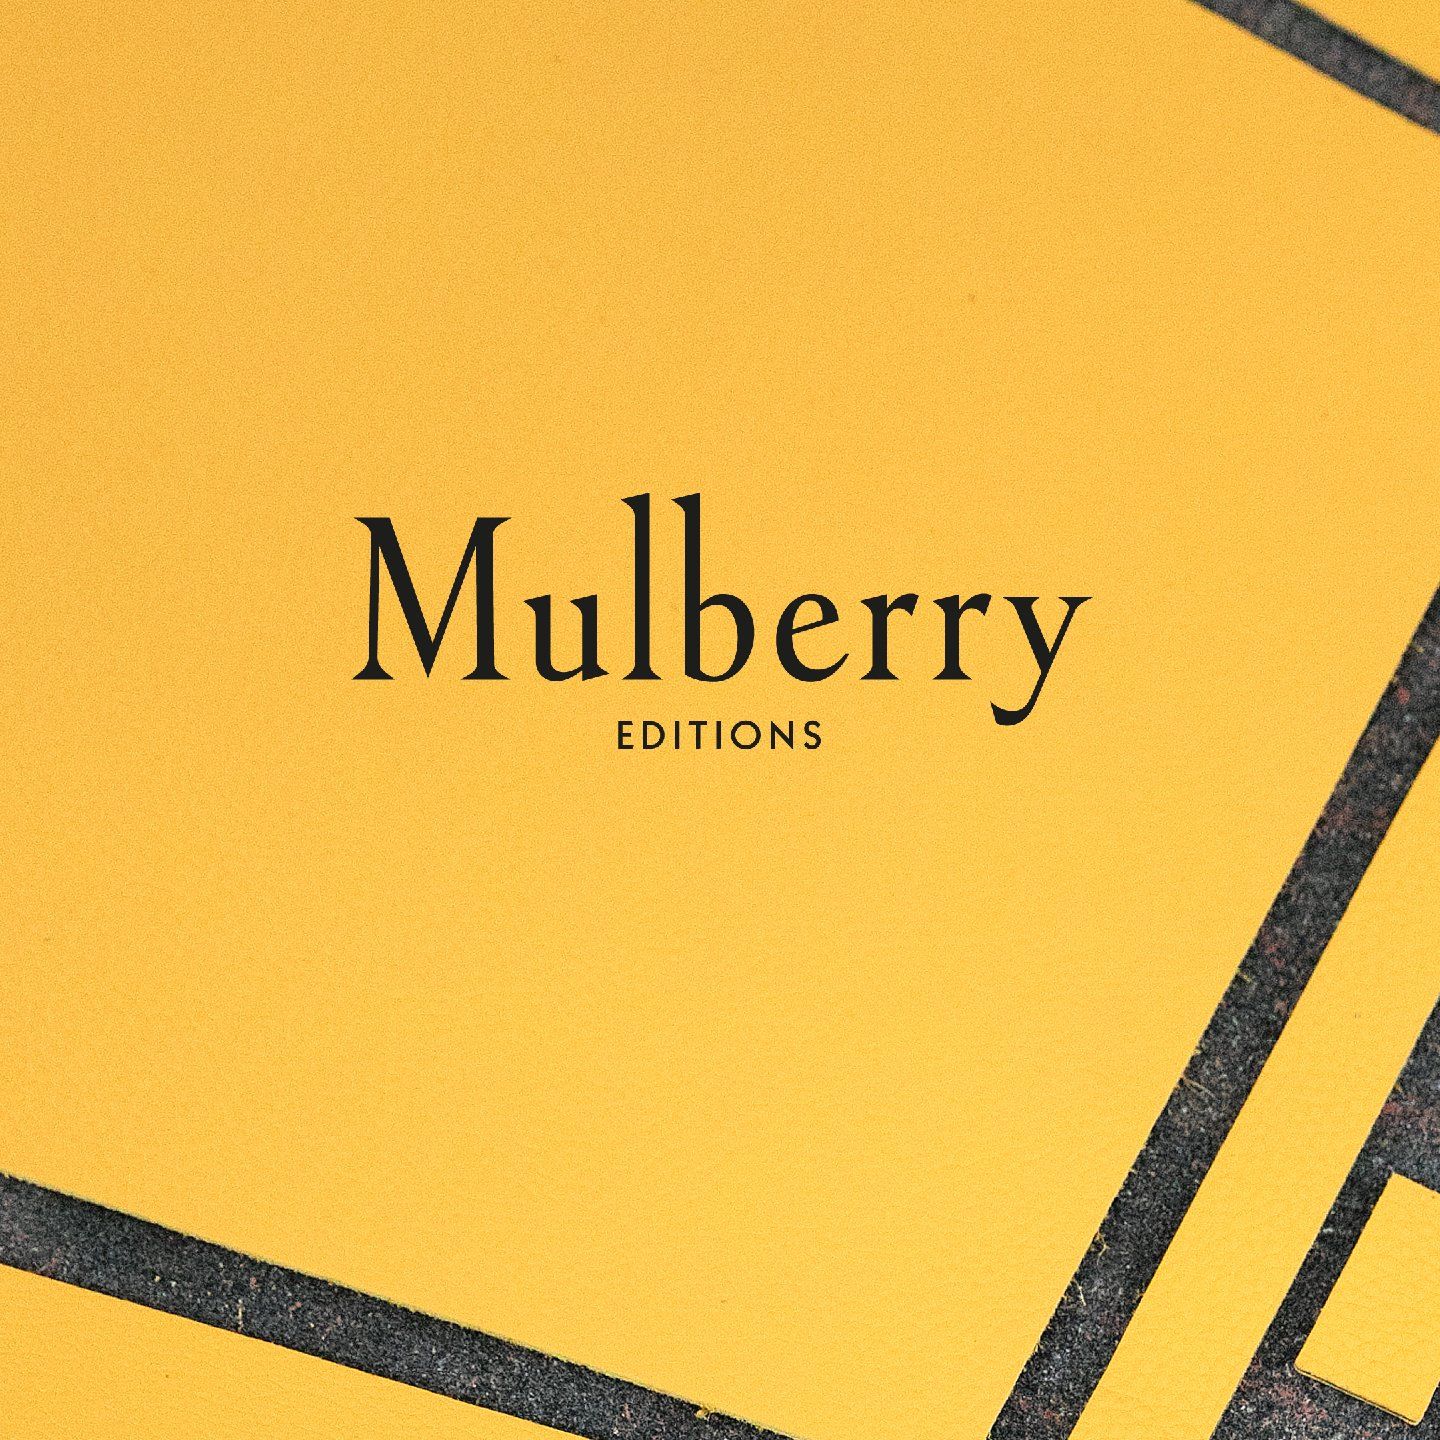 mulberry logo on yellow background